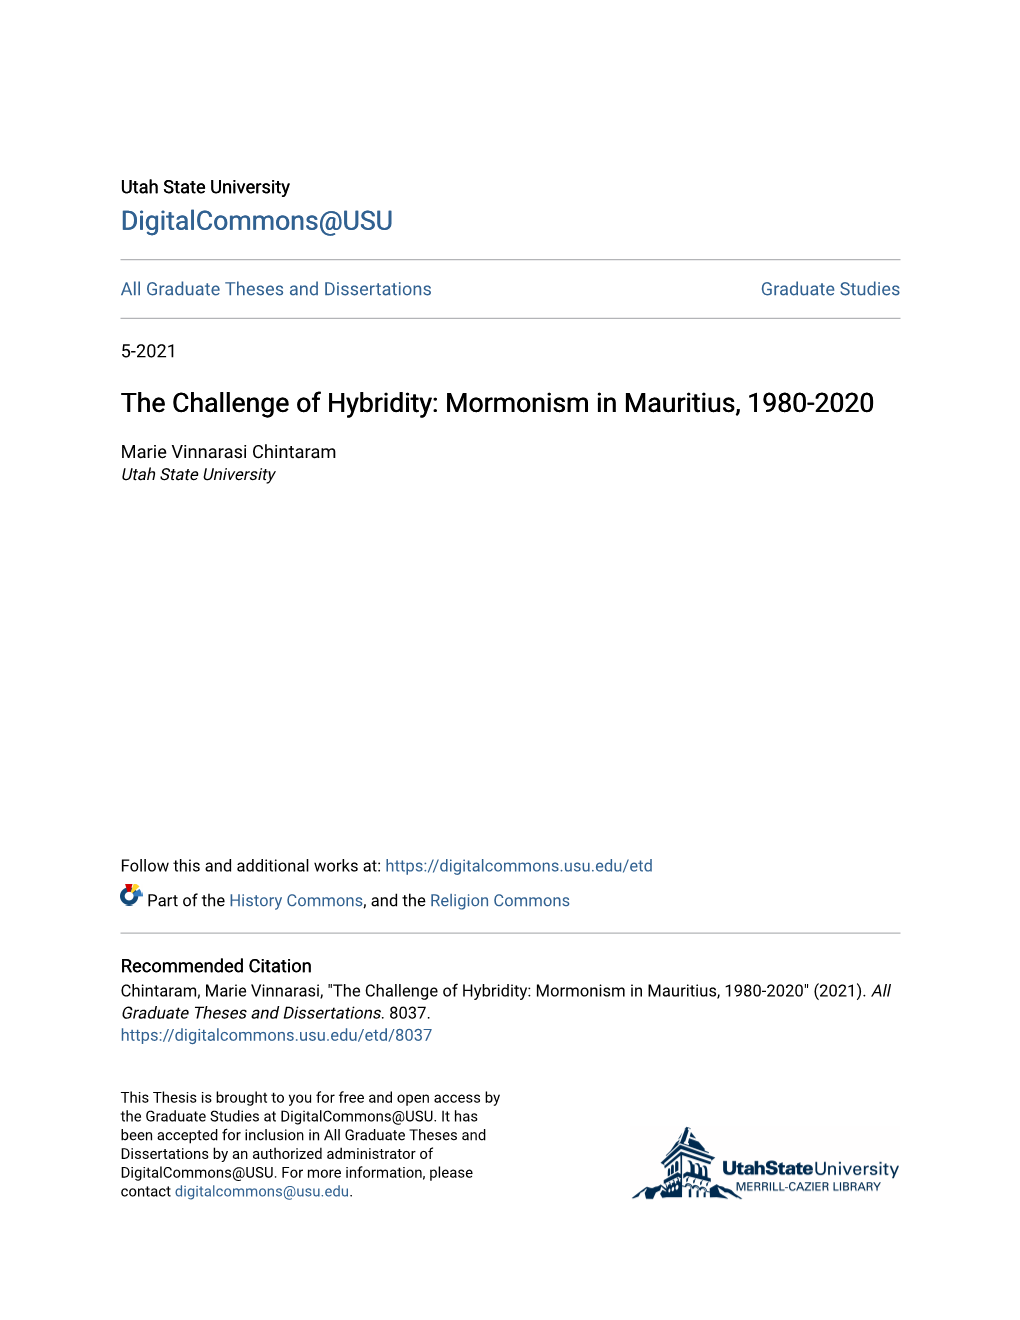 The Challenge of Hybridity: Mormonism in Mauritius, 1980-2020